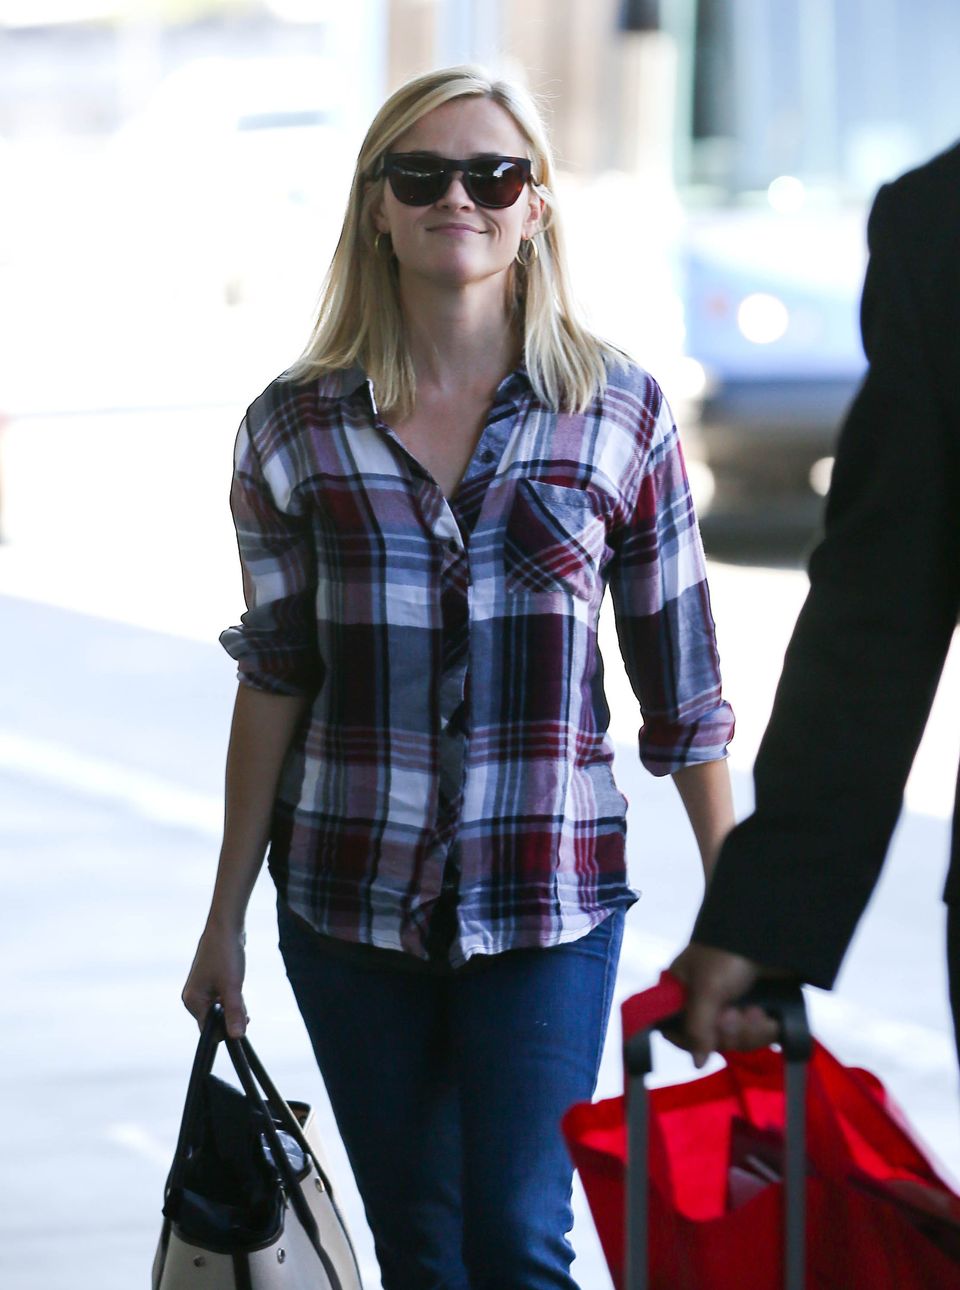 Reese Witherspoon's Top 